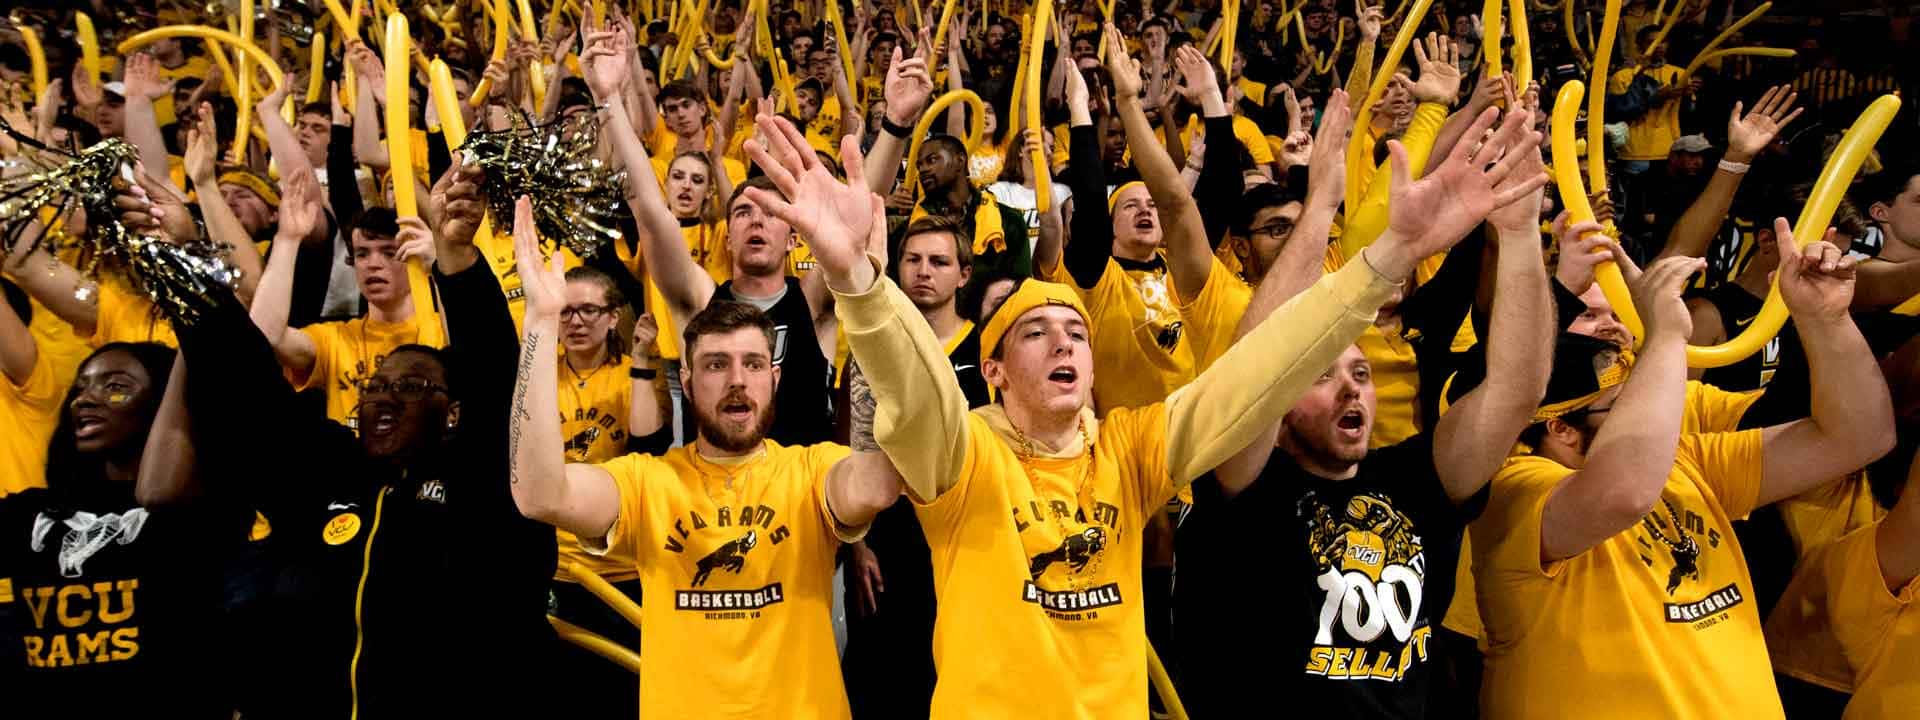 The student section during a VCU basketball game